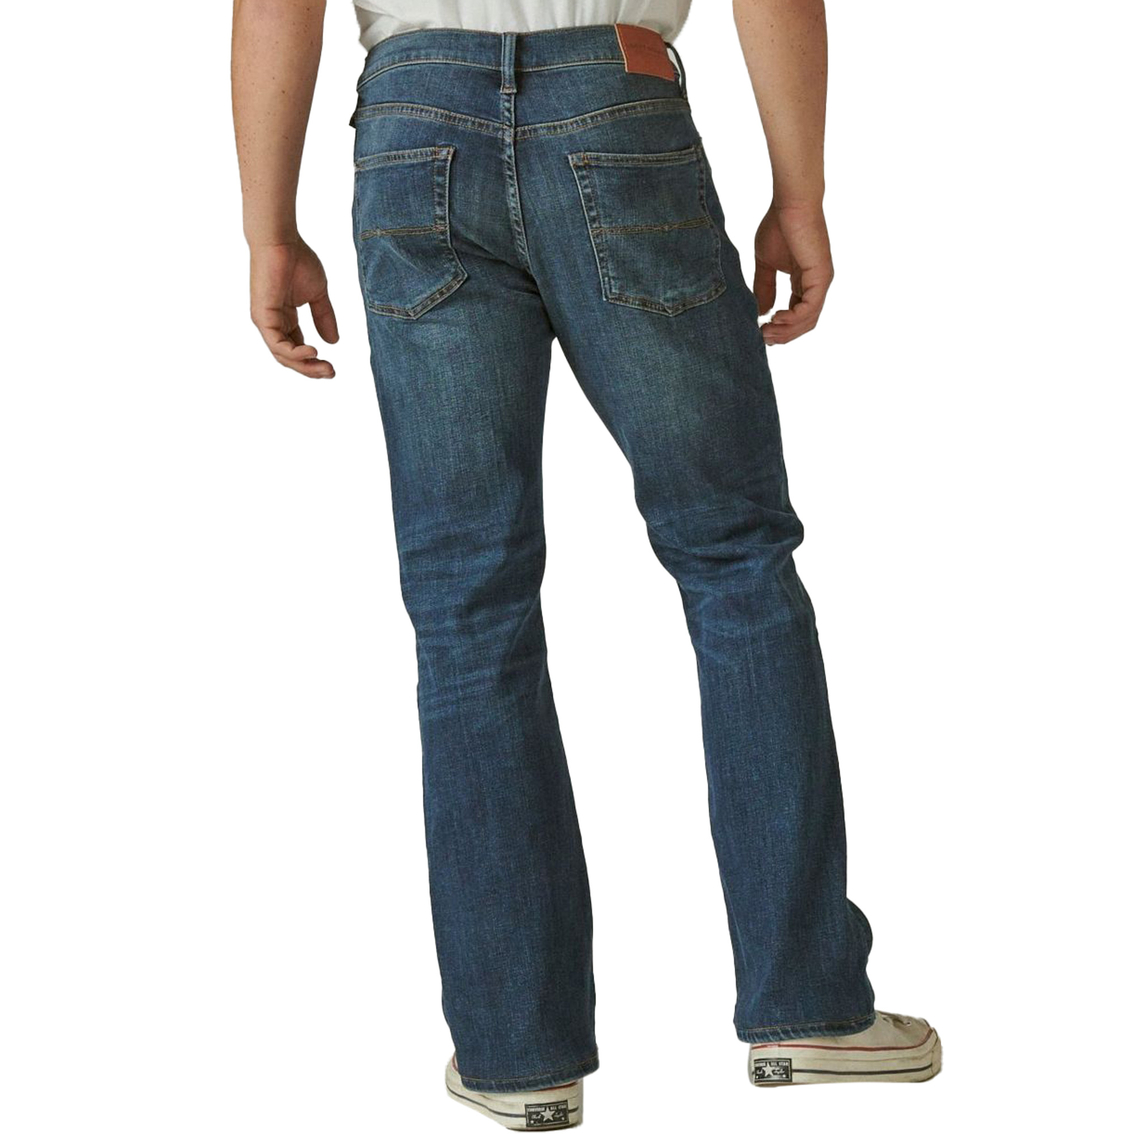 Easy Rider Bootcut Coolmax Stretch Jeans - Image 2 of 5